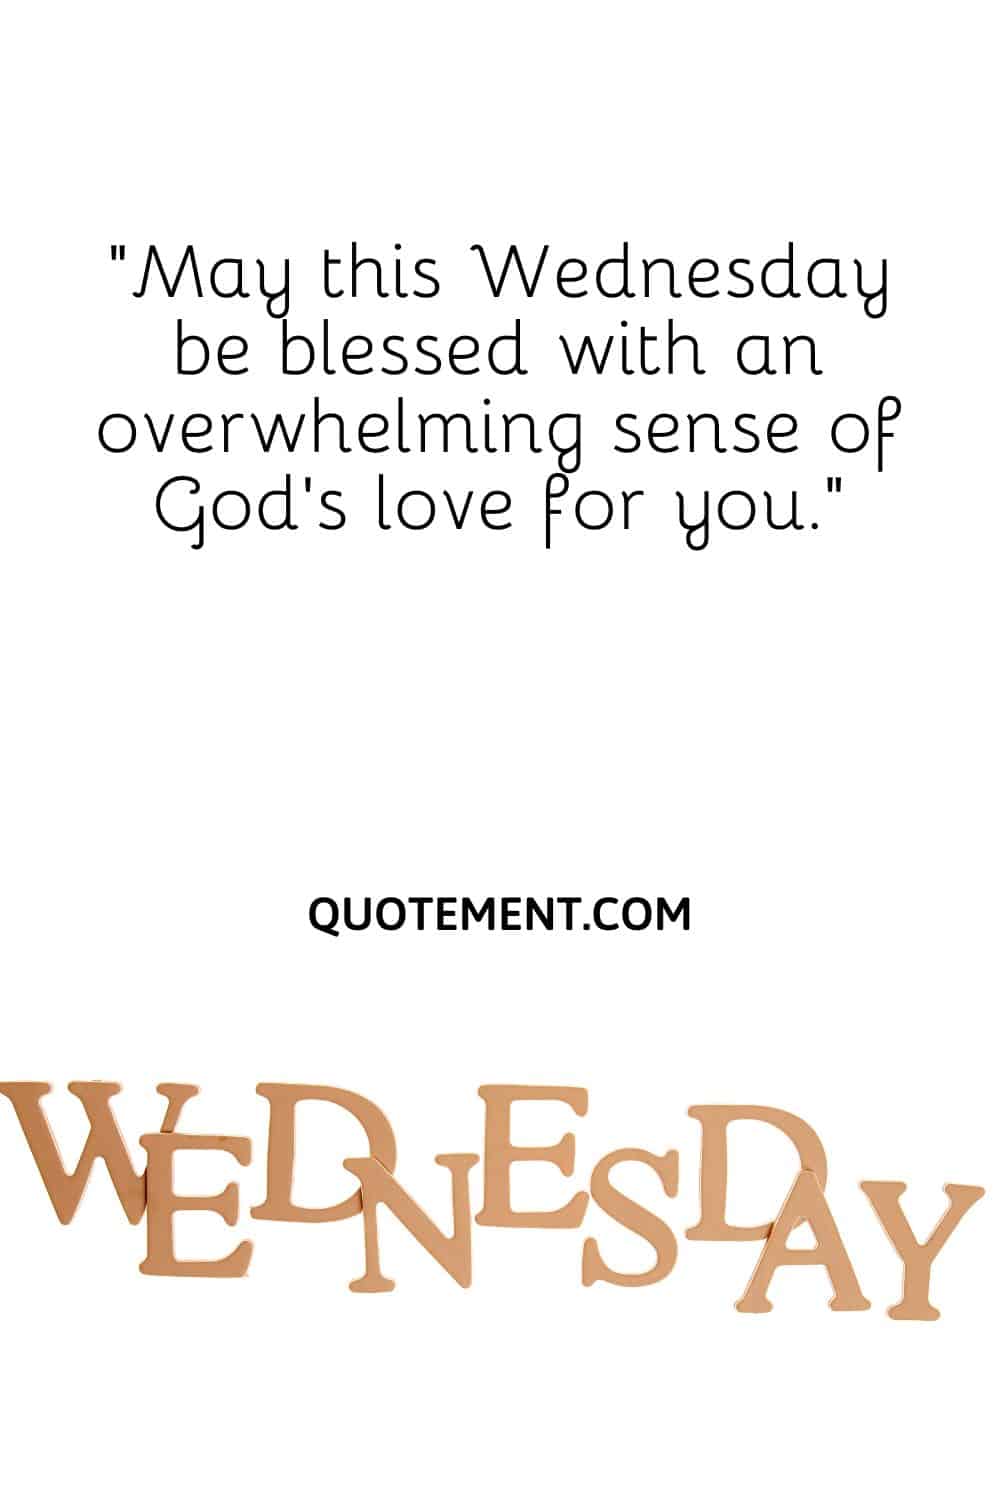 May this Wednesday be blessed with an overwhelming sense of God’s love for you